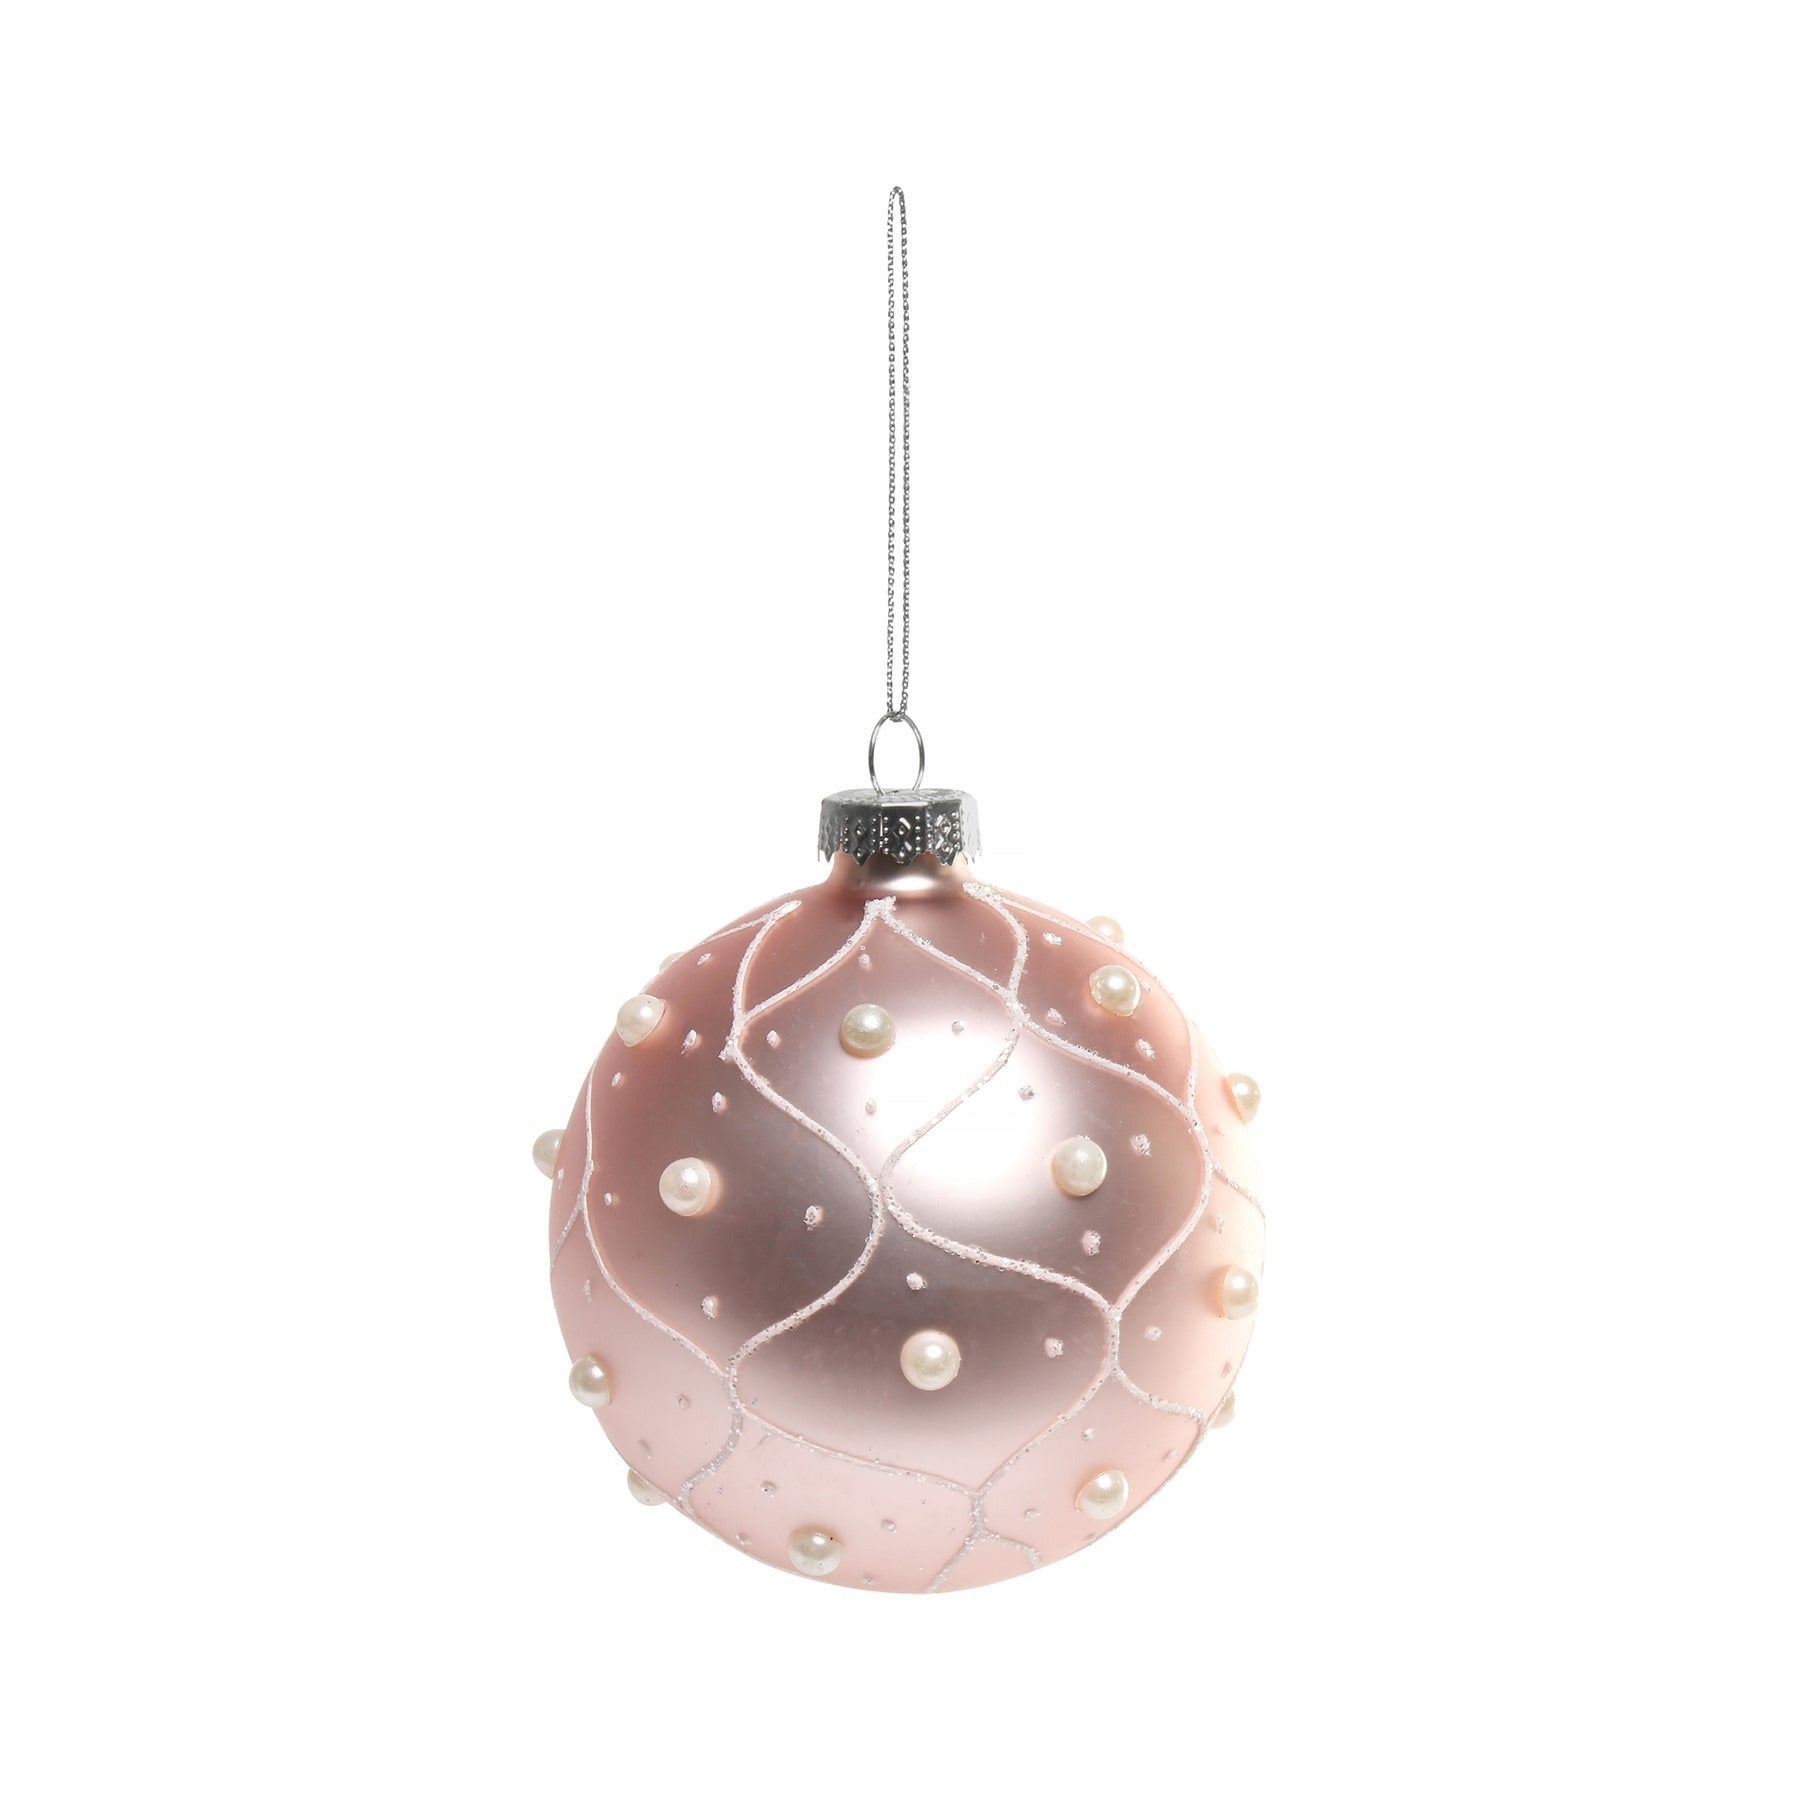 View Pink Pearl Patterned Glass Bauble Dia8cm information